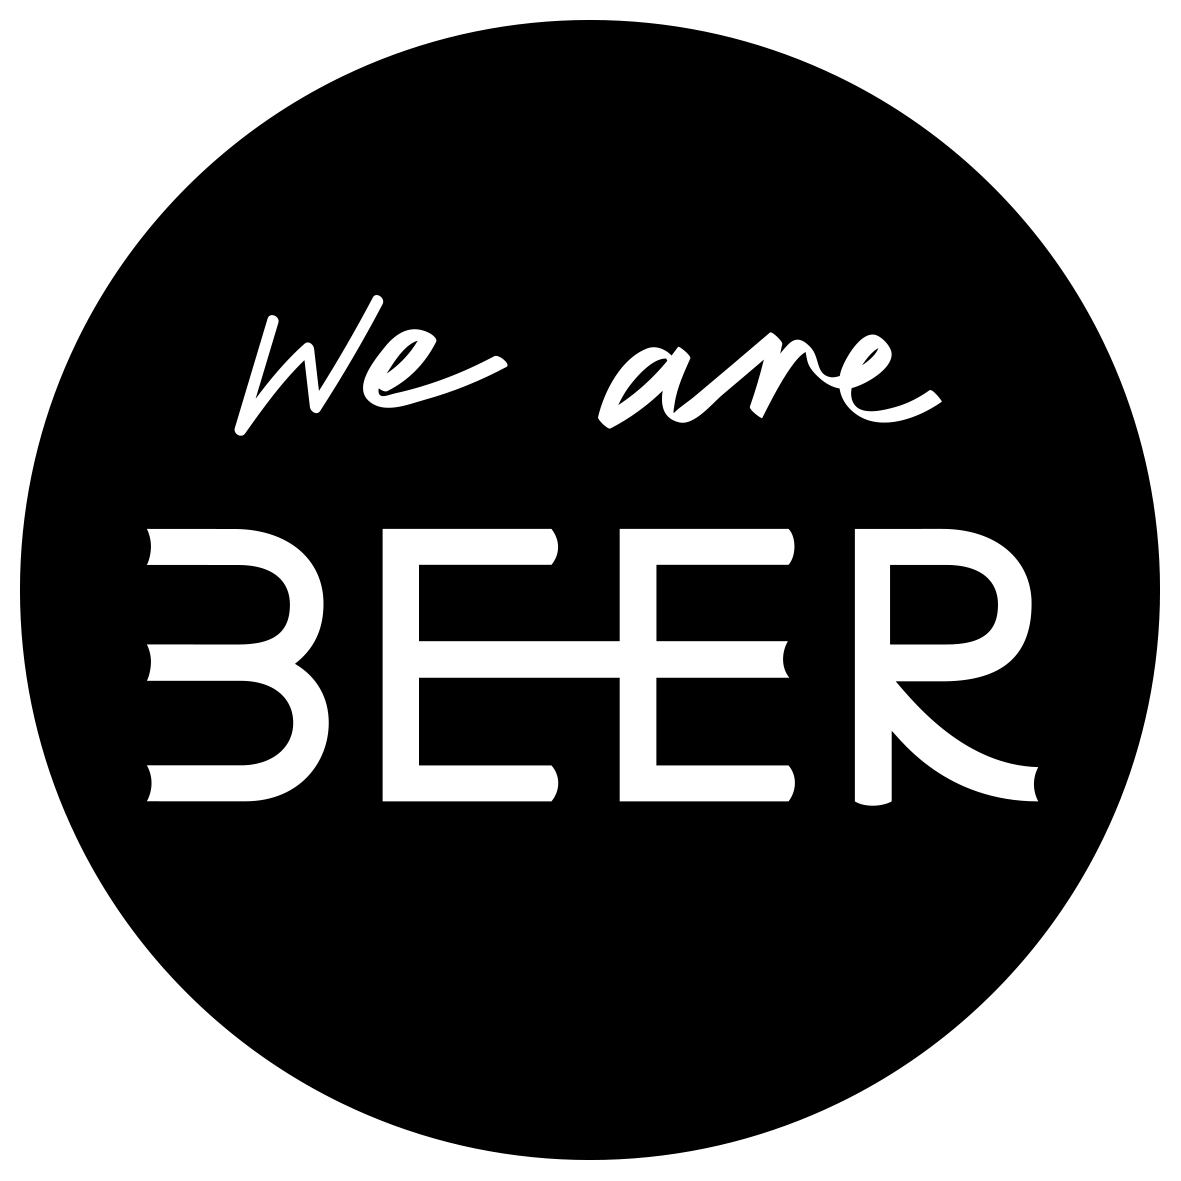 We Are Beer Bar